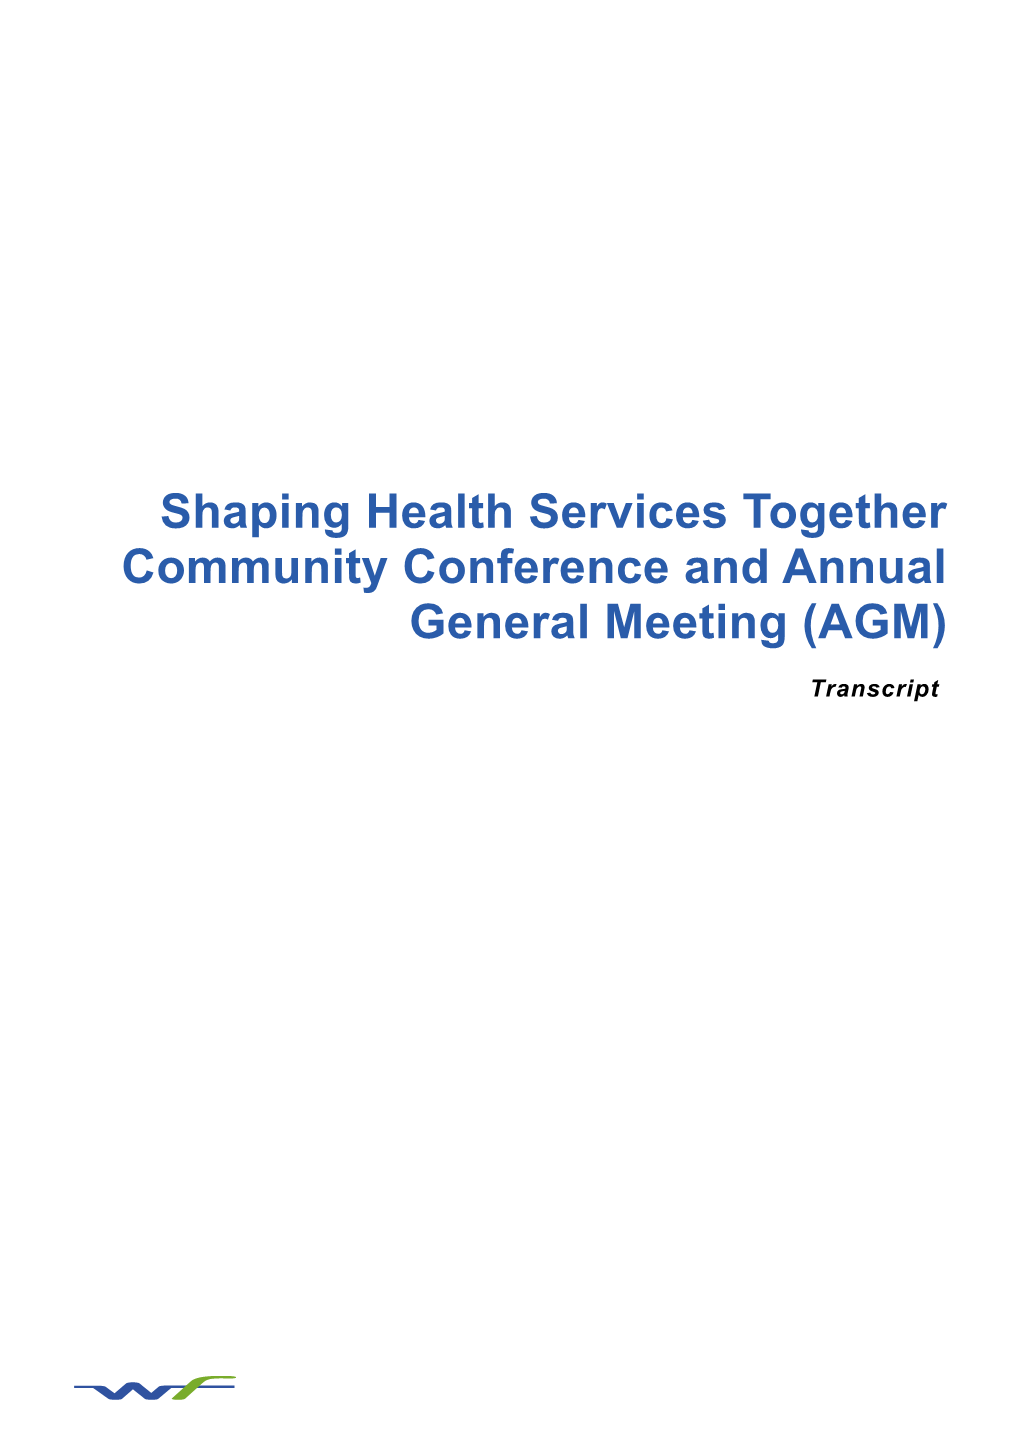 Shaping Health Services Together Community Conference and Annual General Meeting (AGM)